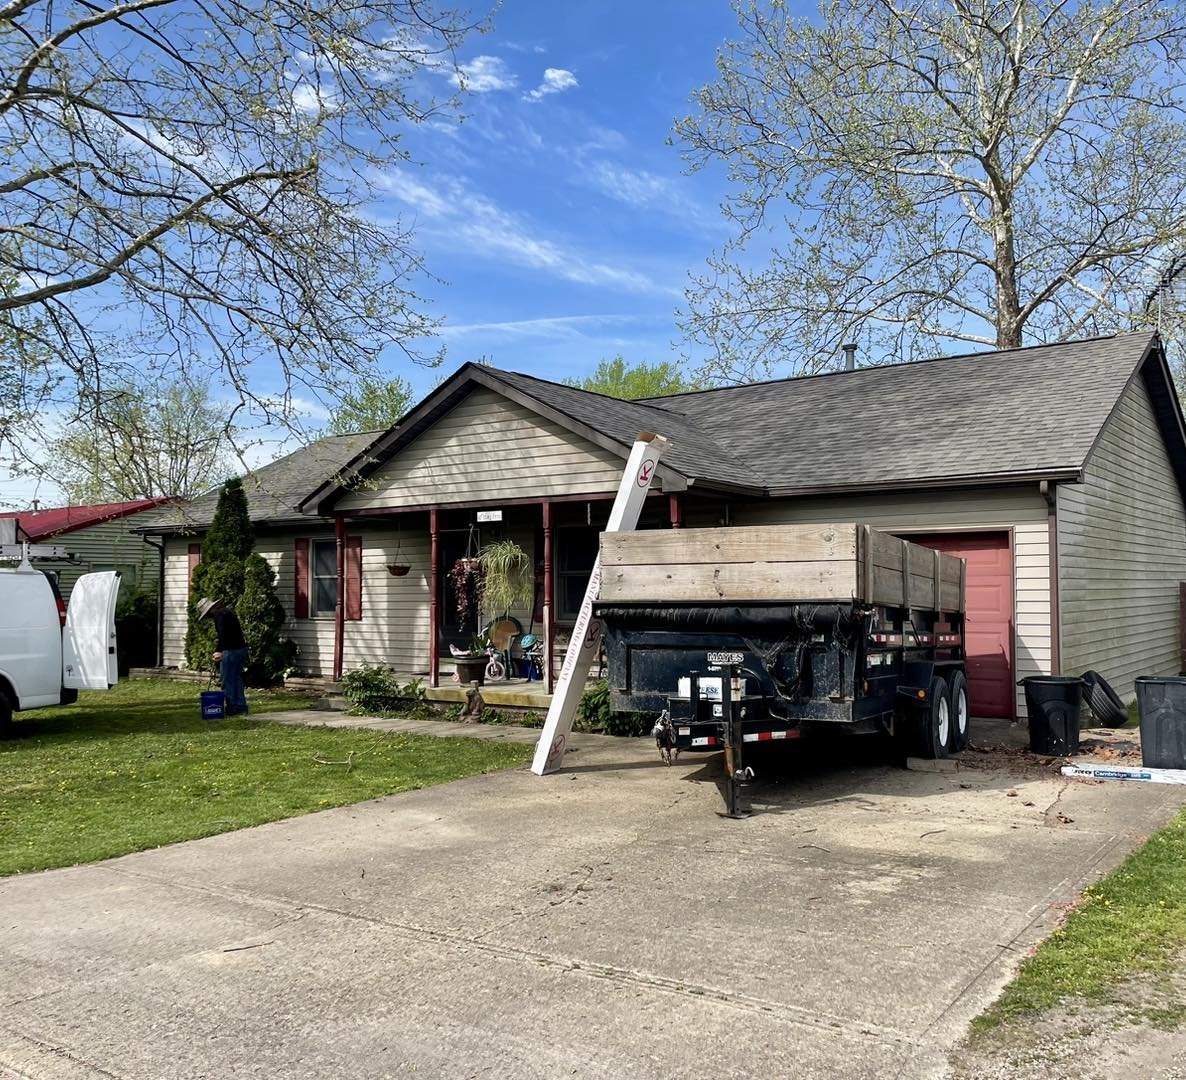 Happy Monday!! A few more roofing projects completed. Proud to provide quality craftsmanship at an affordable price! Contact us for your free estimate!  #NewRoof #PayLessWithWes